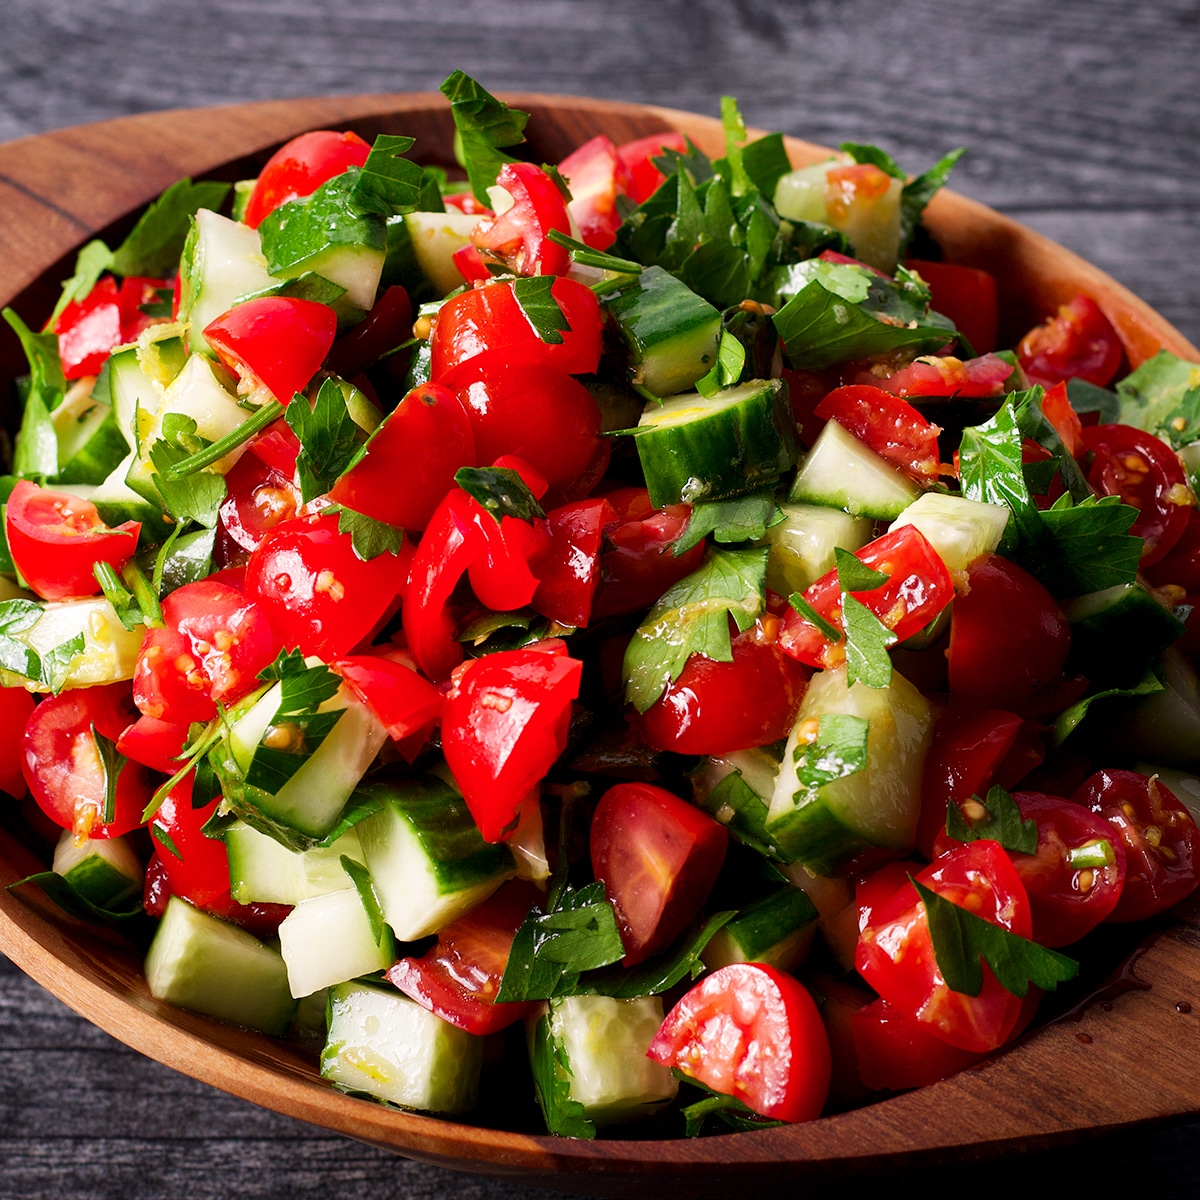 A wood bowl containing tomato and cucumber salad.